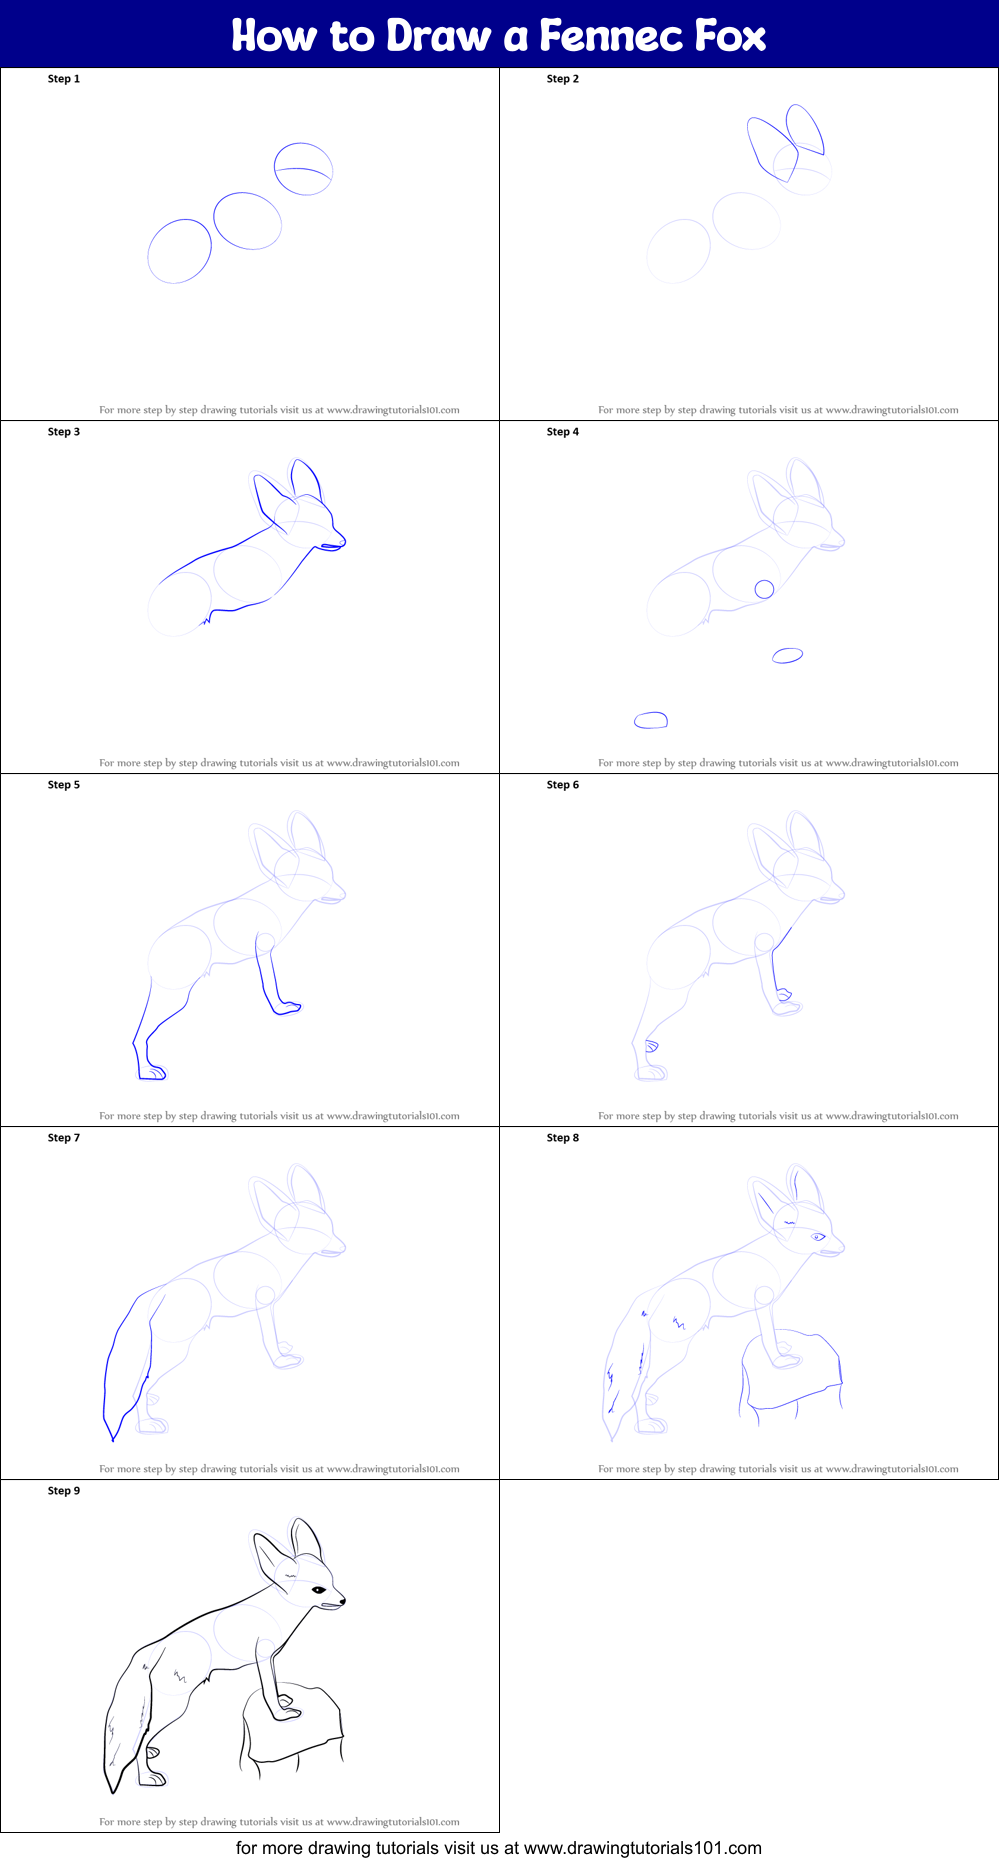 How to Draw a Fennec Fox printable step by step drawing sheet